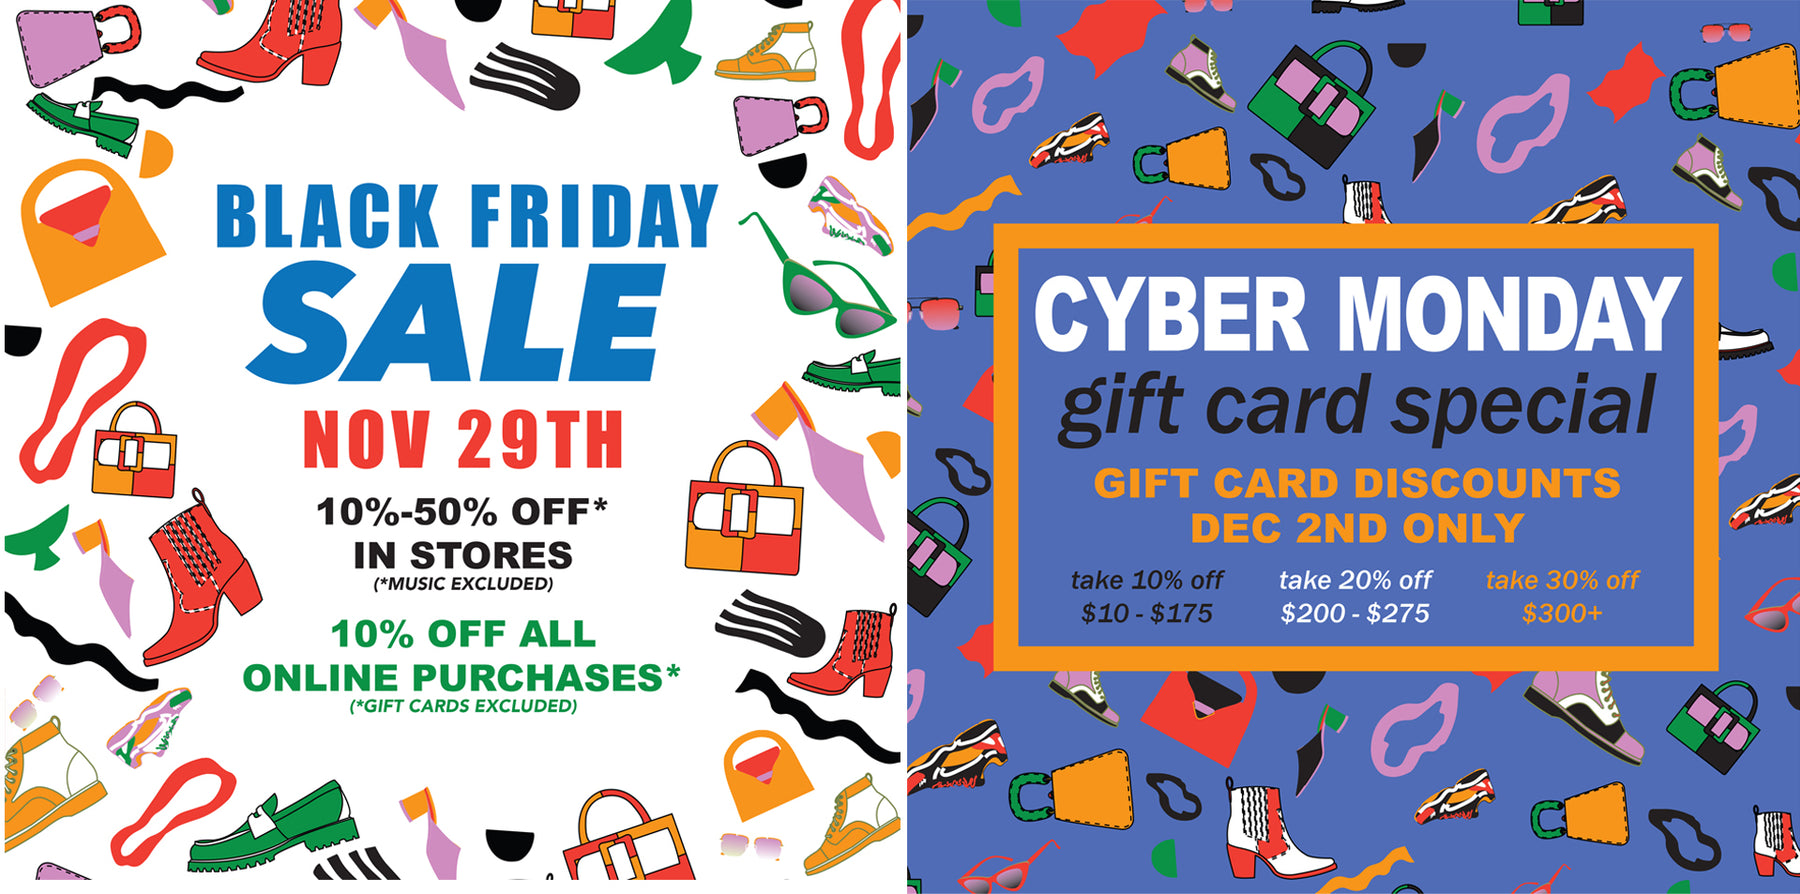 diptych flyers: black friday sale nov 29th in stores (music excluded) 10% off all online purchases * (gift cards excluded). and flyer: cyber monday gift card special gift card discounts dec 2nd only, full description of flyers in blog. 